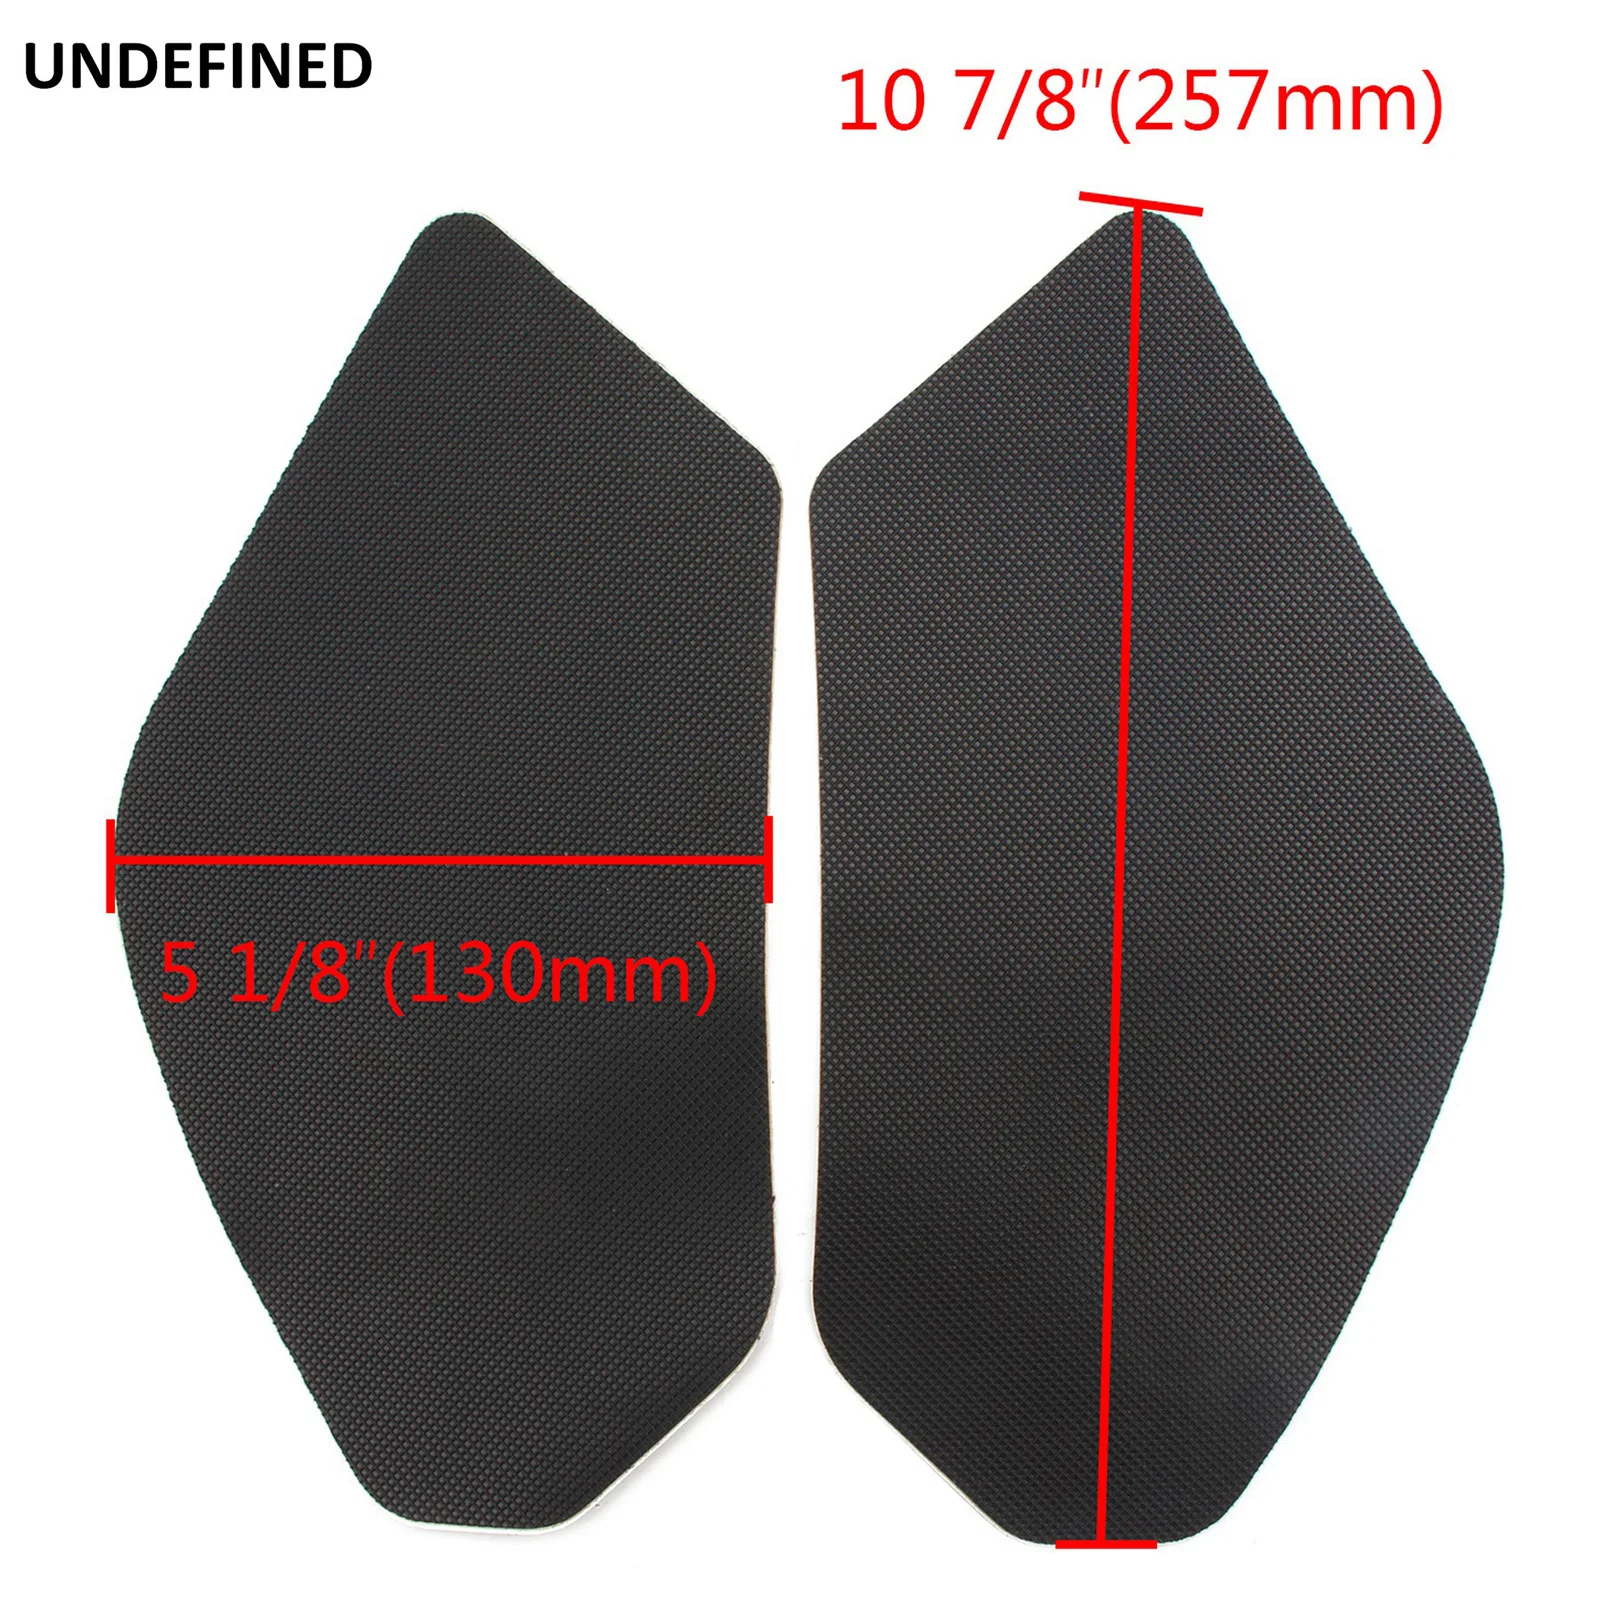 Motorcycle Gas Tank Sticker Fuel Tank Pad Protector Guard Decal Anti-Slip Knee Grip Rubber For Honda CBR600RR CBR 600RR 03-2006 images - 6